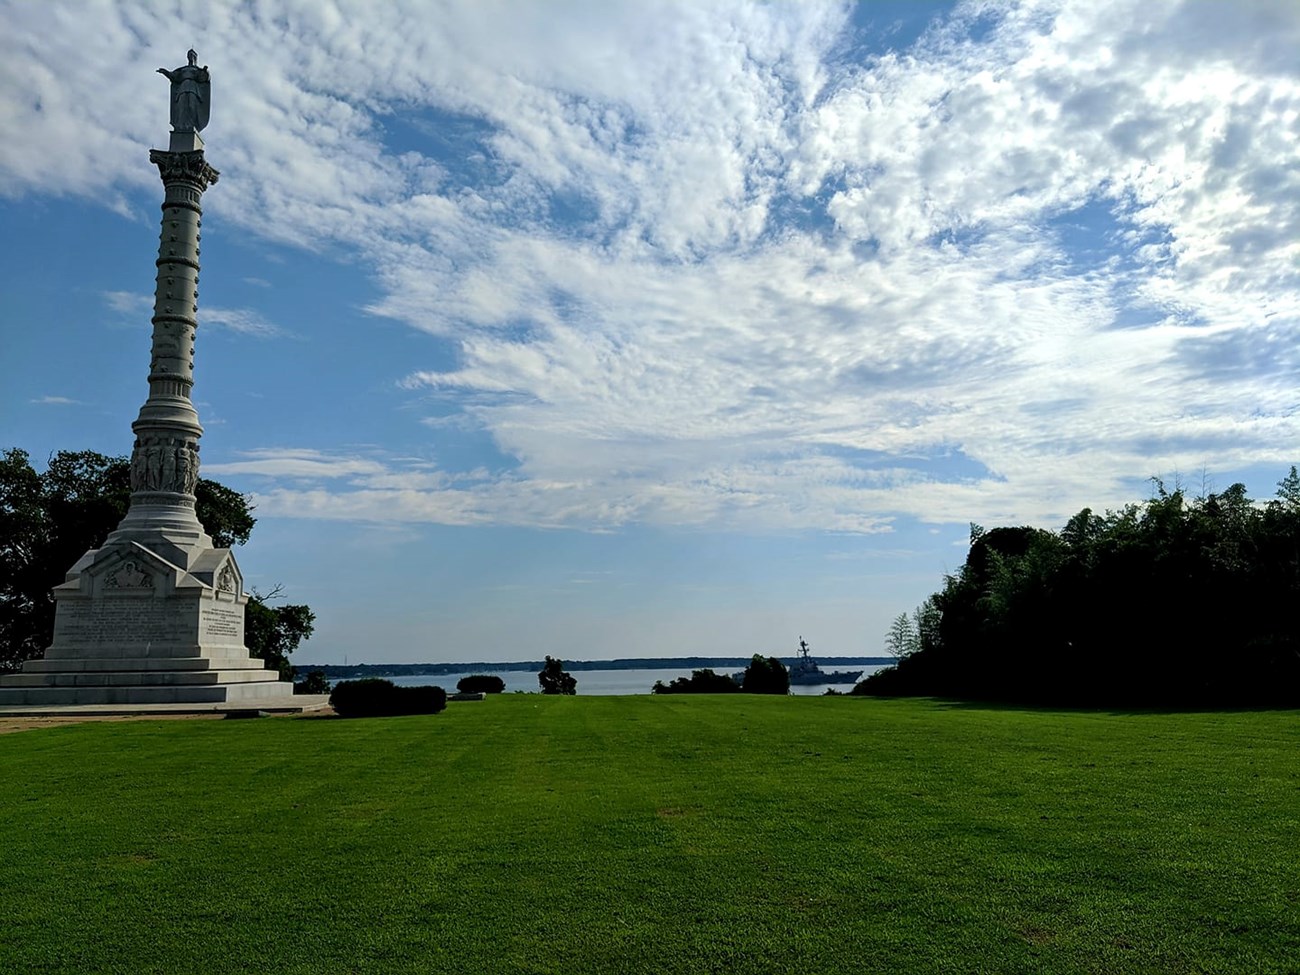 A tall obelisk monument is pictures in front of a blue cloudy sky. In the background is the York River.